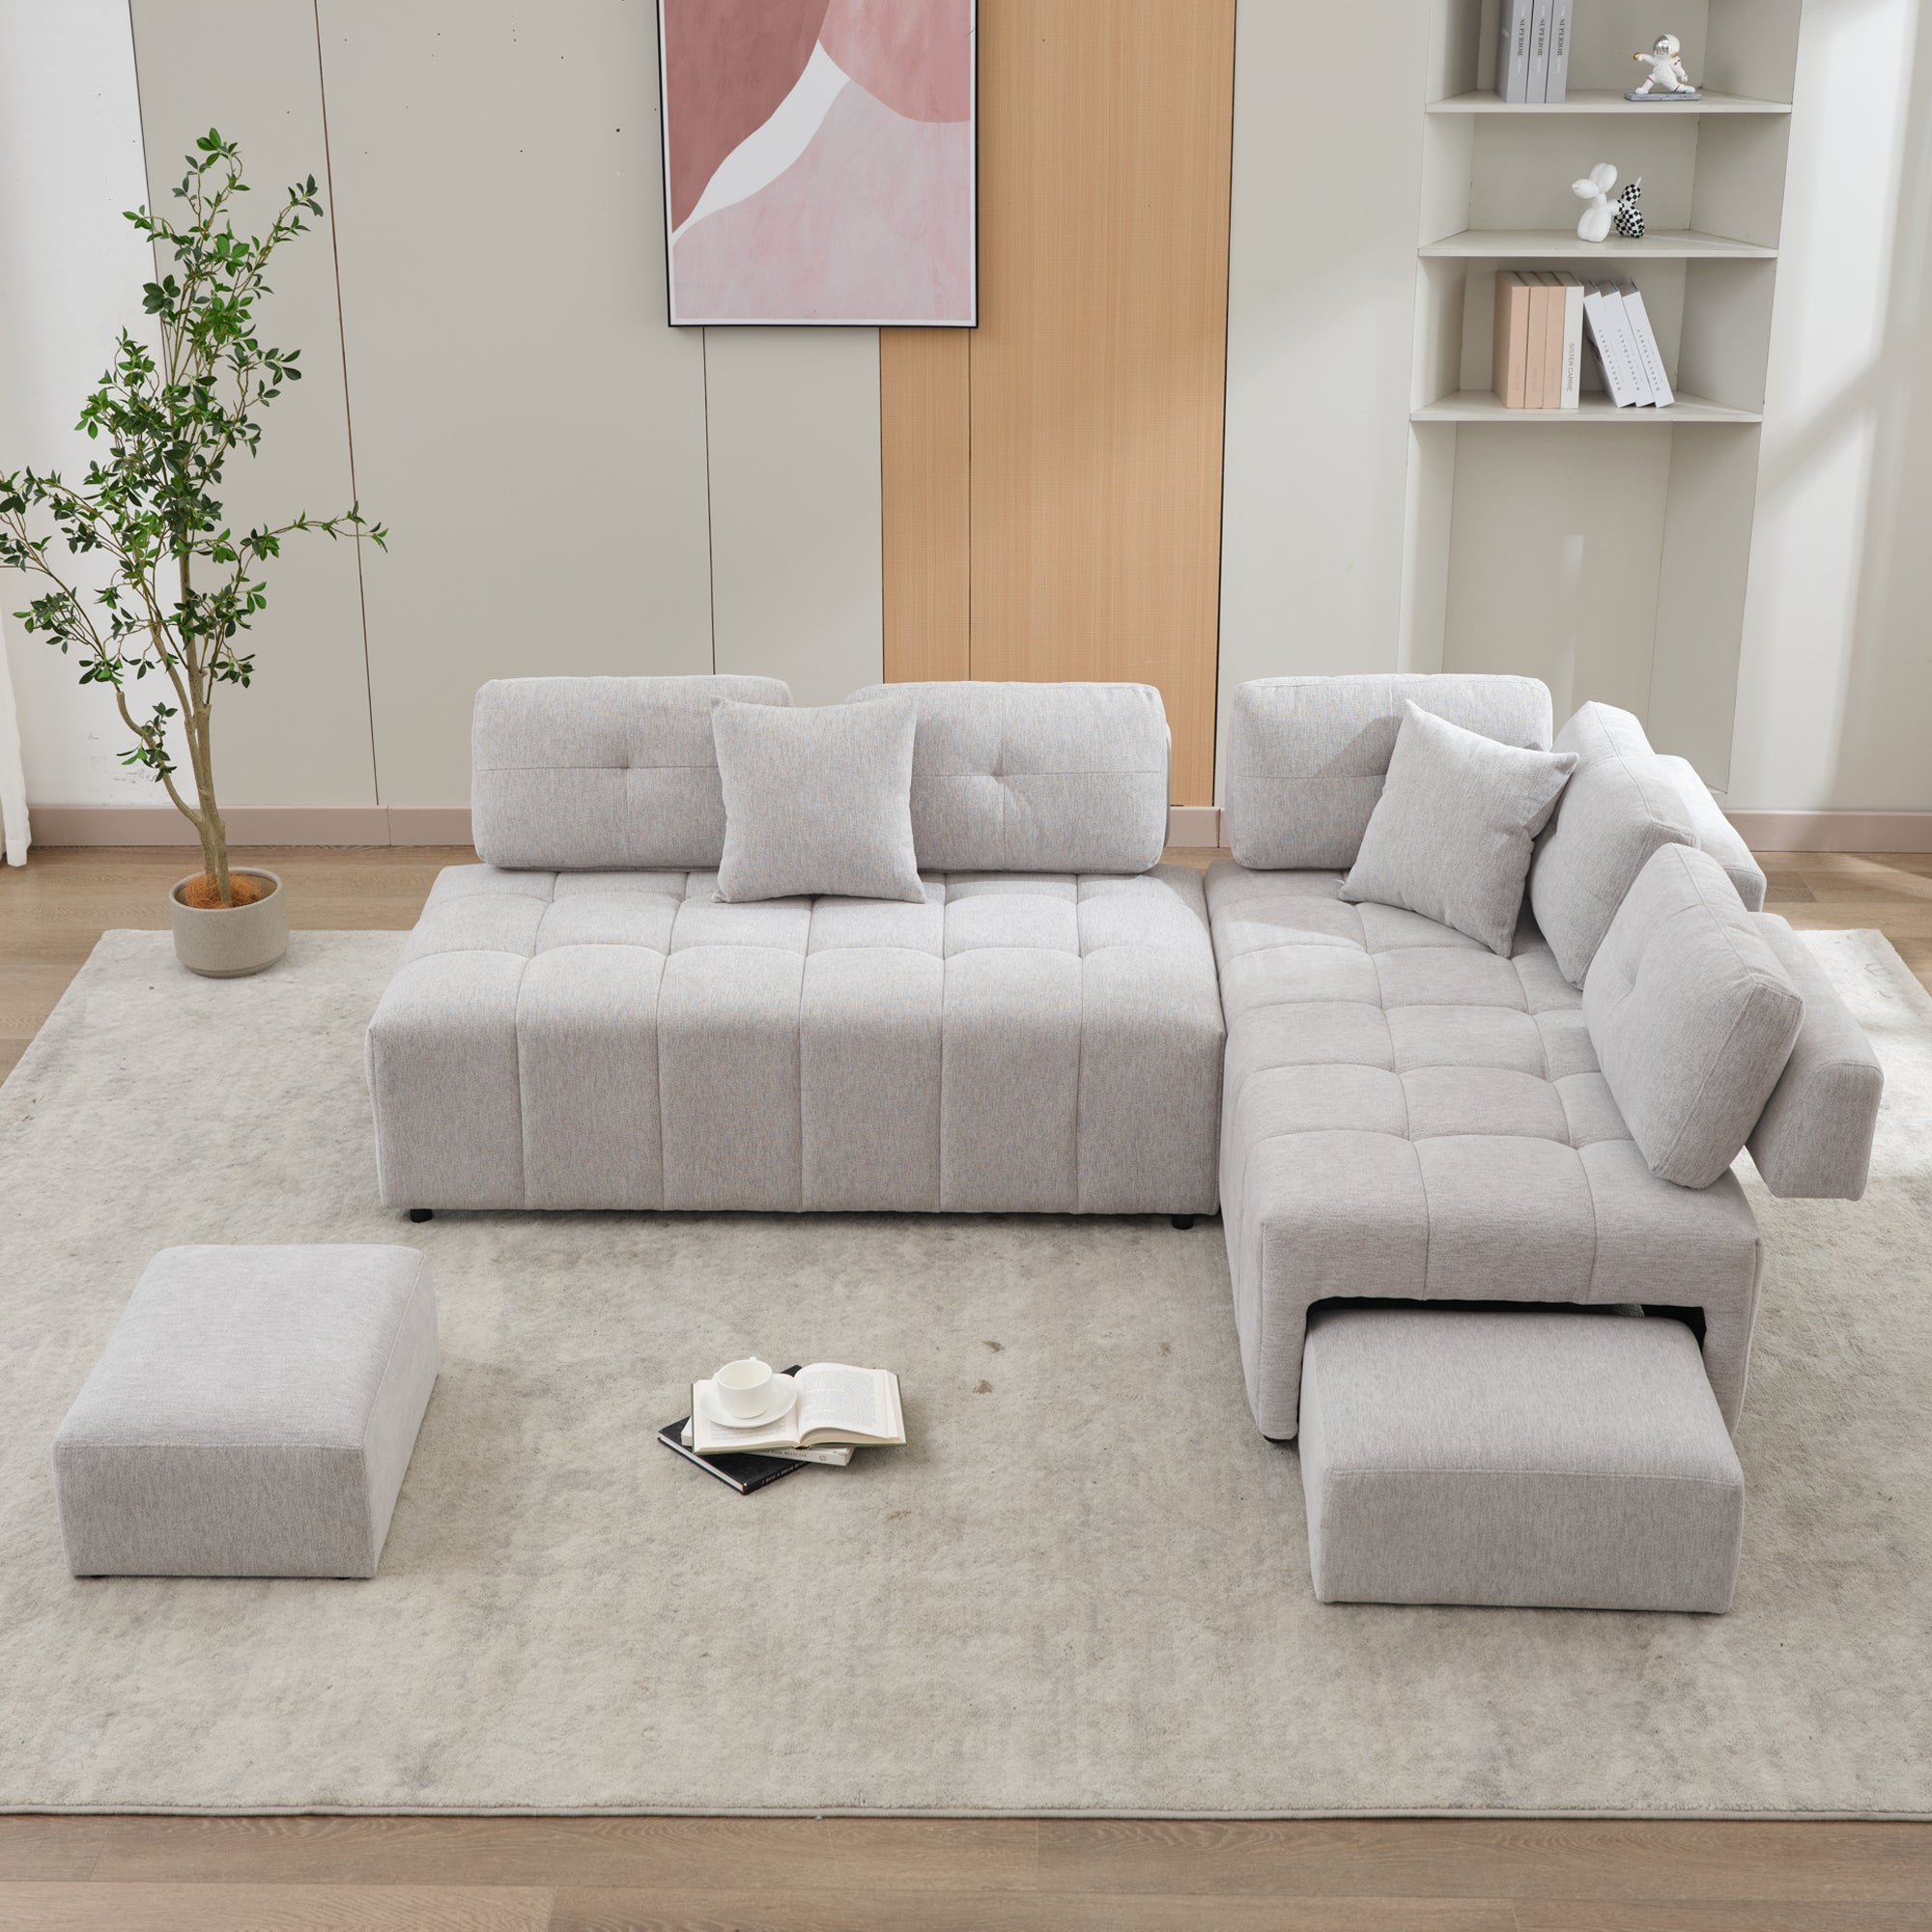 L-Shaped Sectional Sofa Couch w/ Stools & Pillows | Light Grey